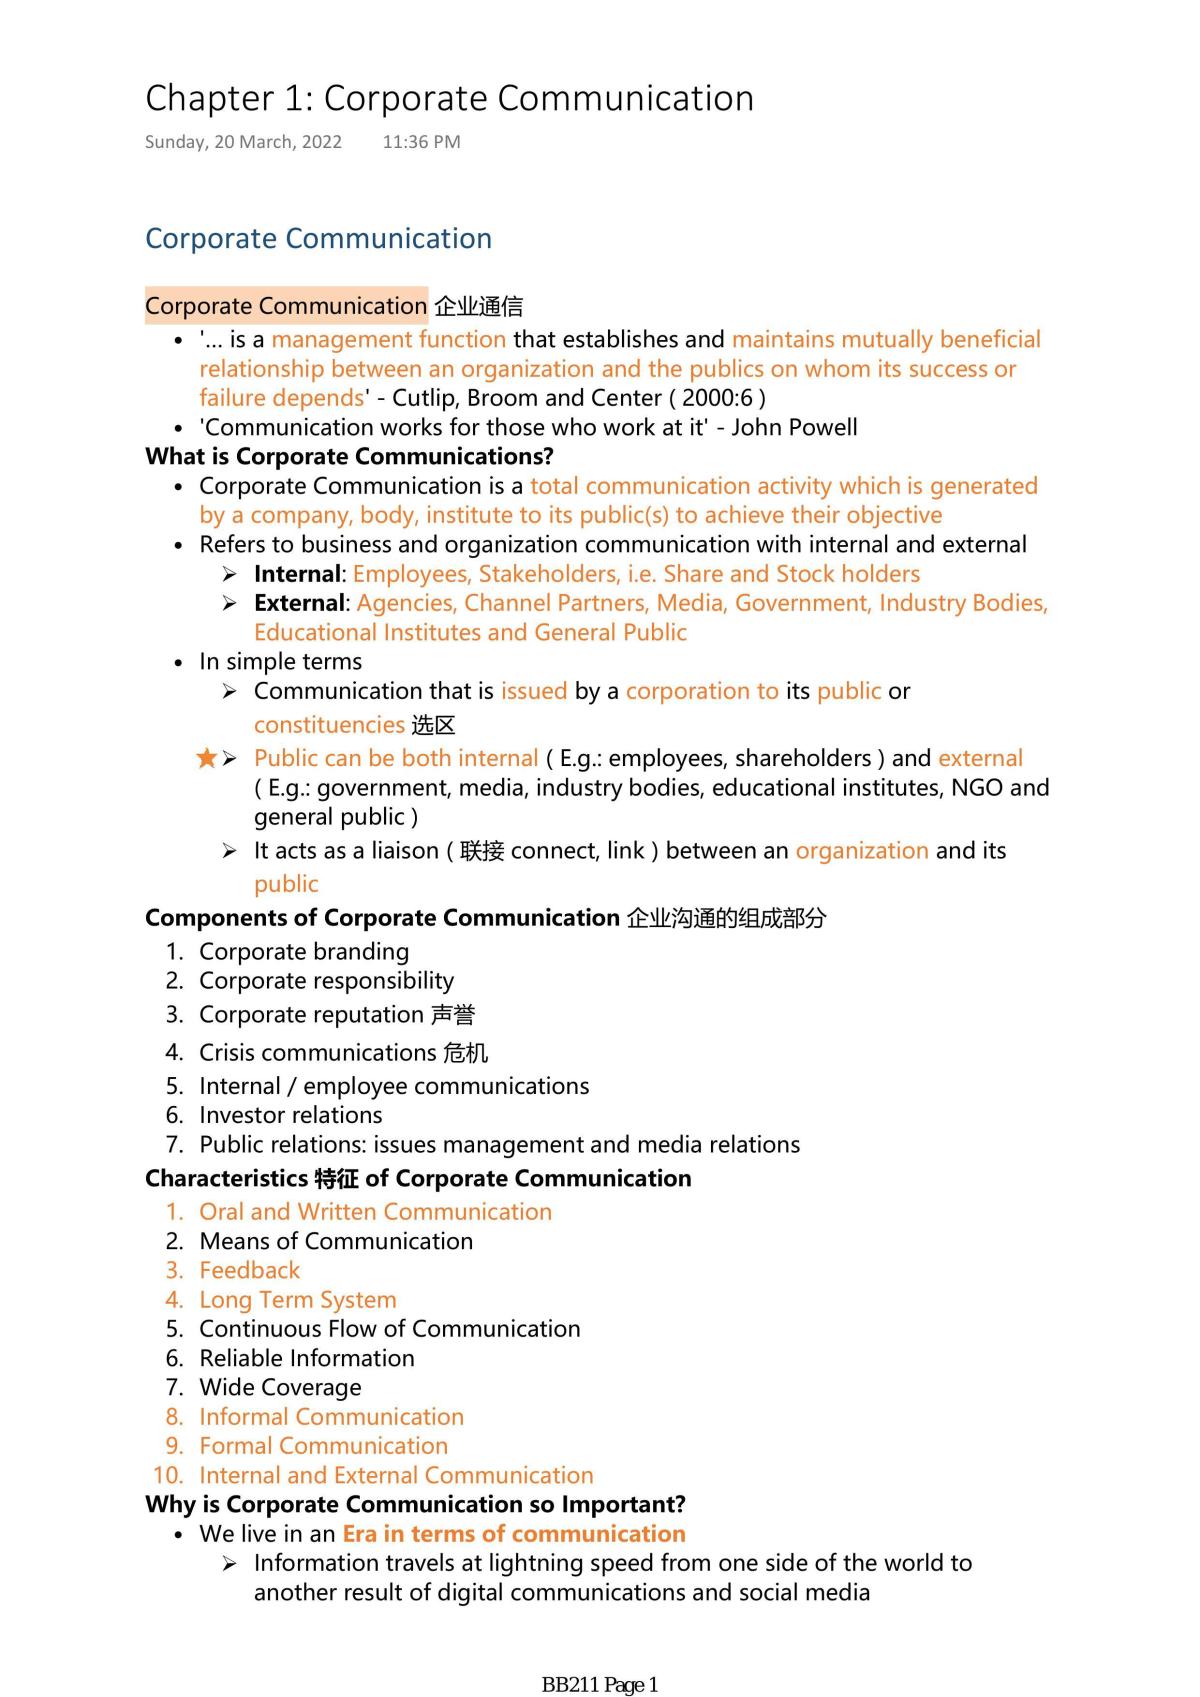 BB 211 - Corporate Communication Study Notes - Page 1